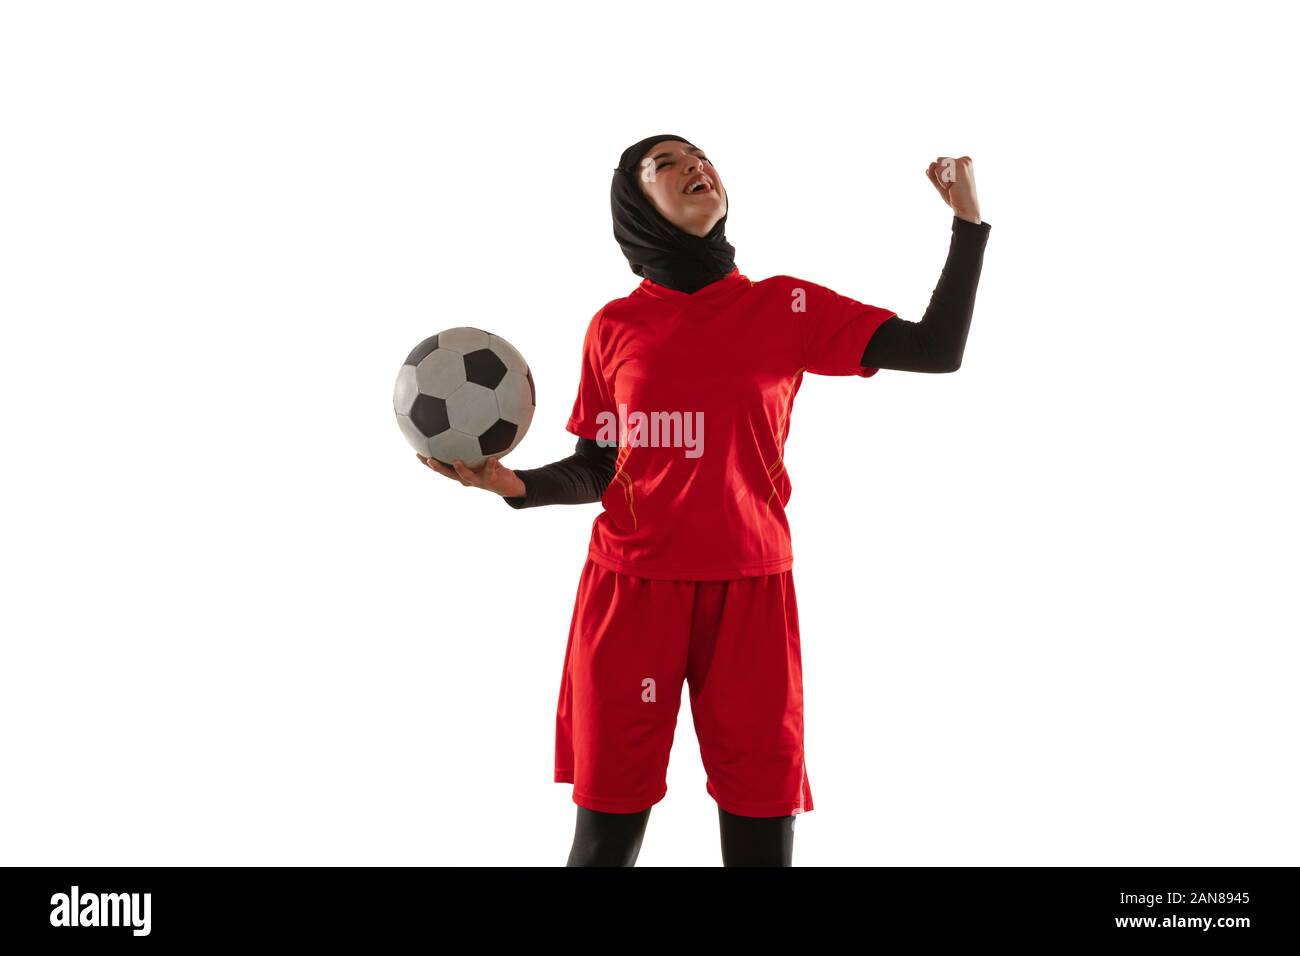 Emotions. Arabian female soccer or football player on white studio background. Young woman celebrating goal or match winning, catched in motion, action. Concept of sport, hobby, healthy lifestyle. Stock Photo